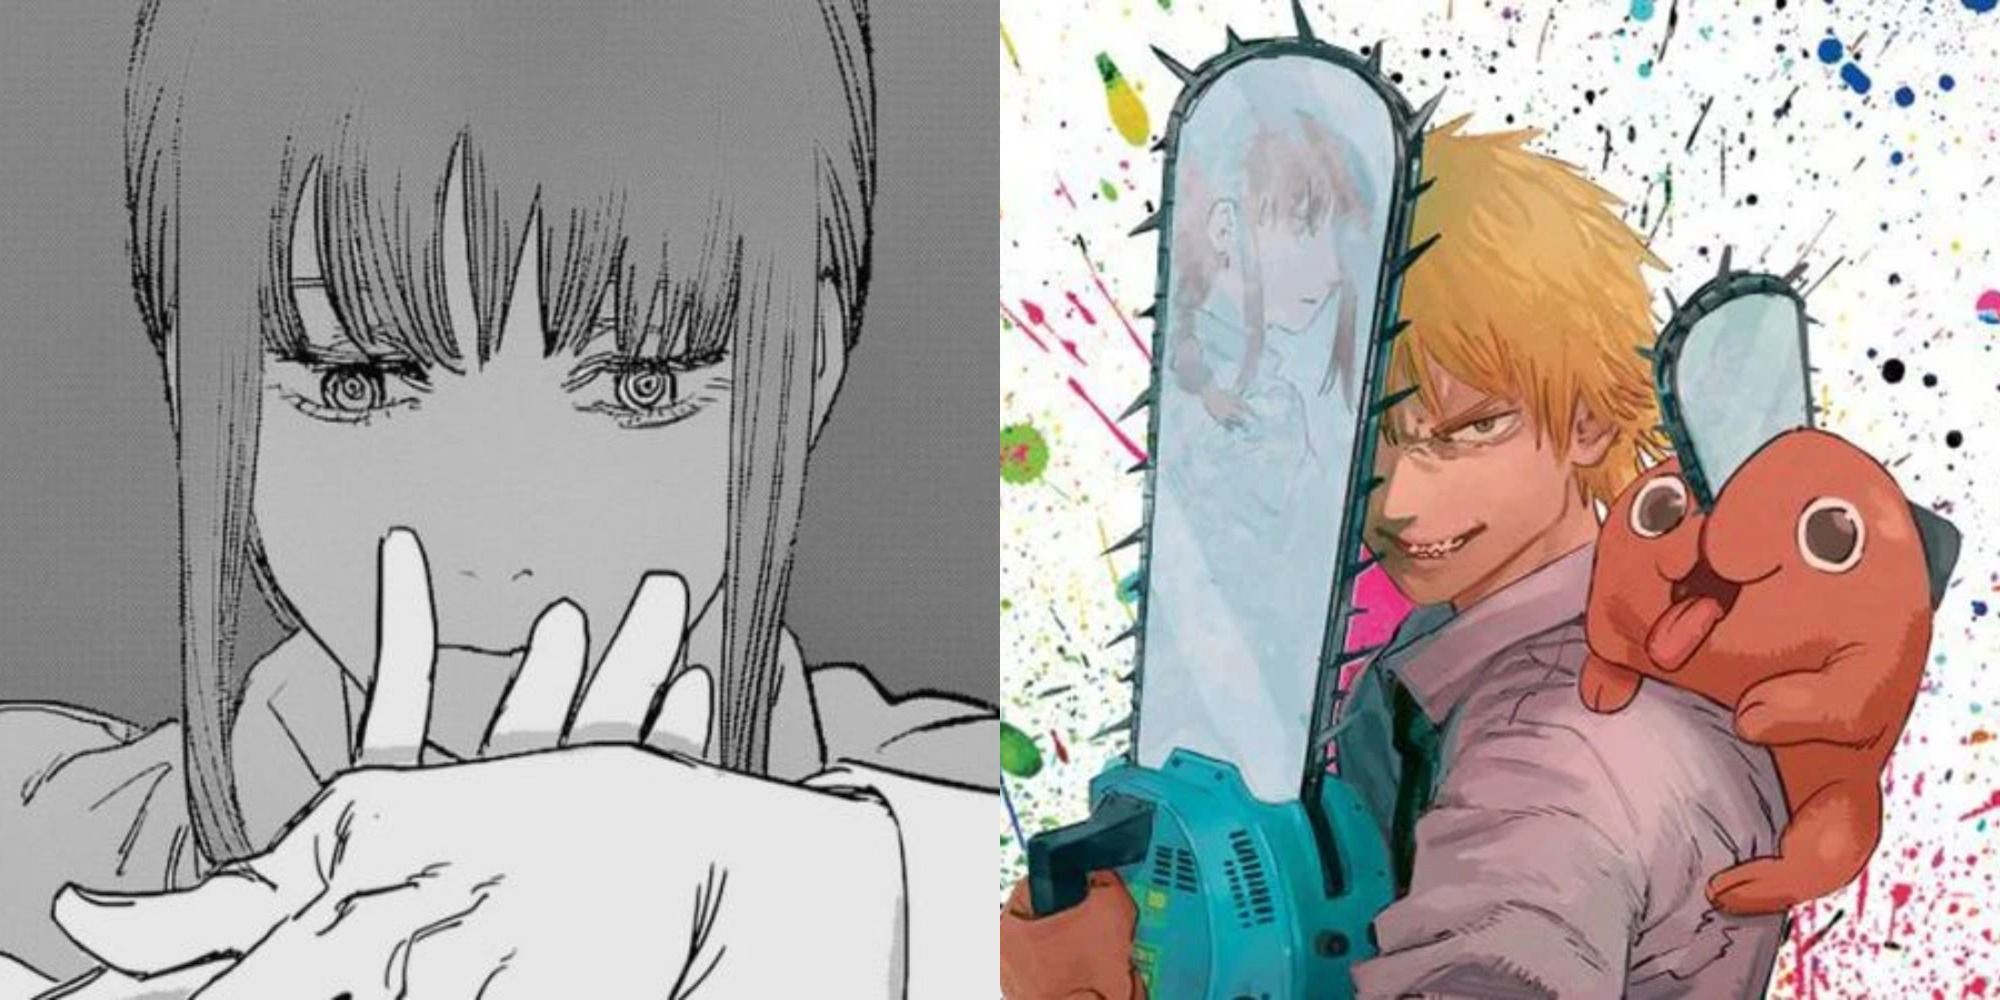 Chainsaw Man EPISODE 2 EXPLAINED!  Plot Breakdown & Things You Missed 